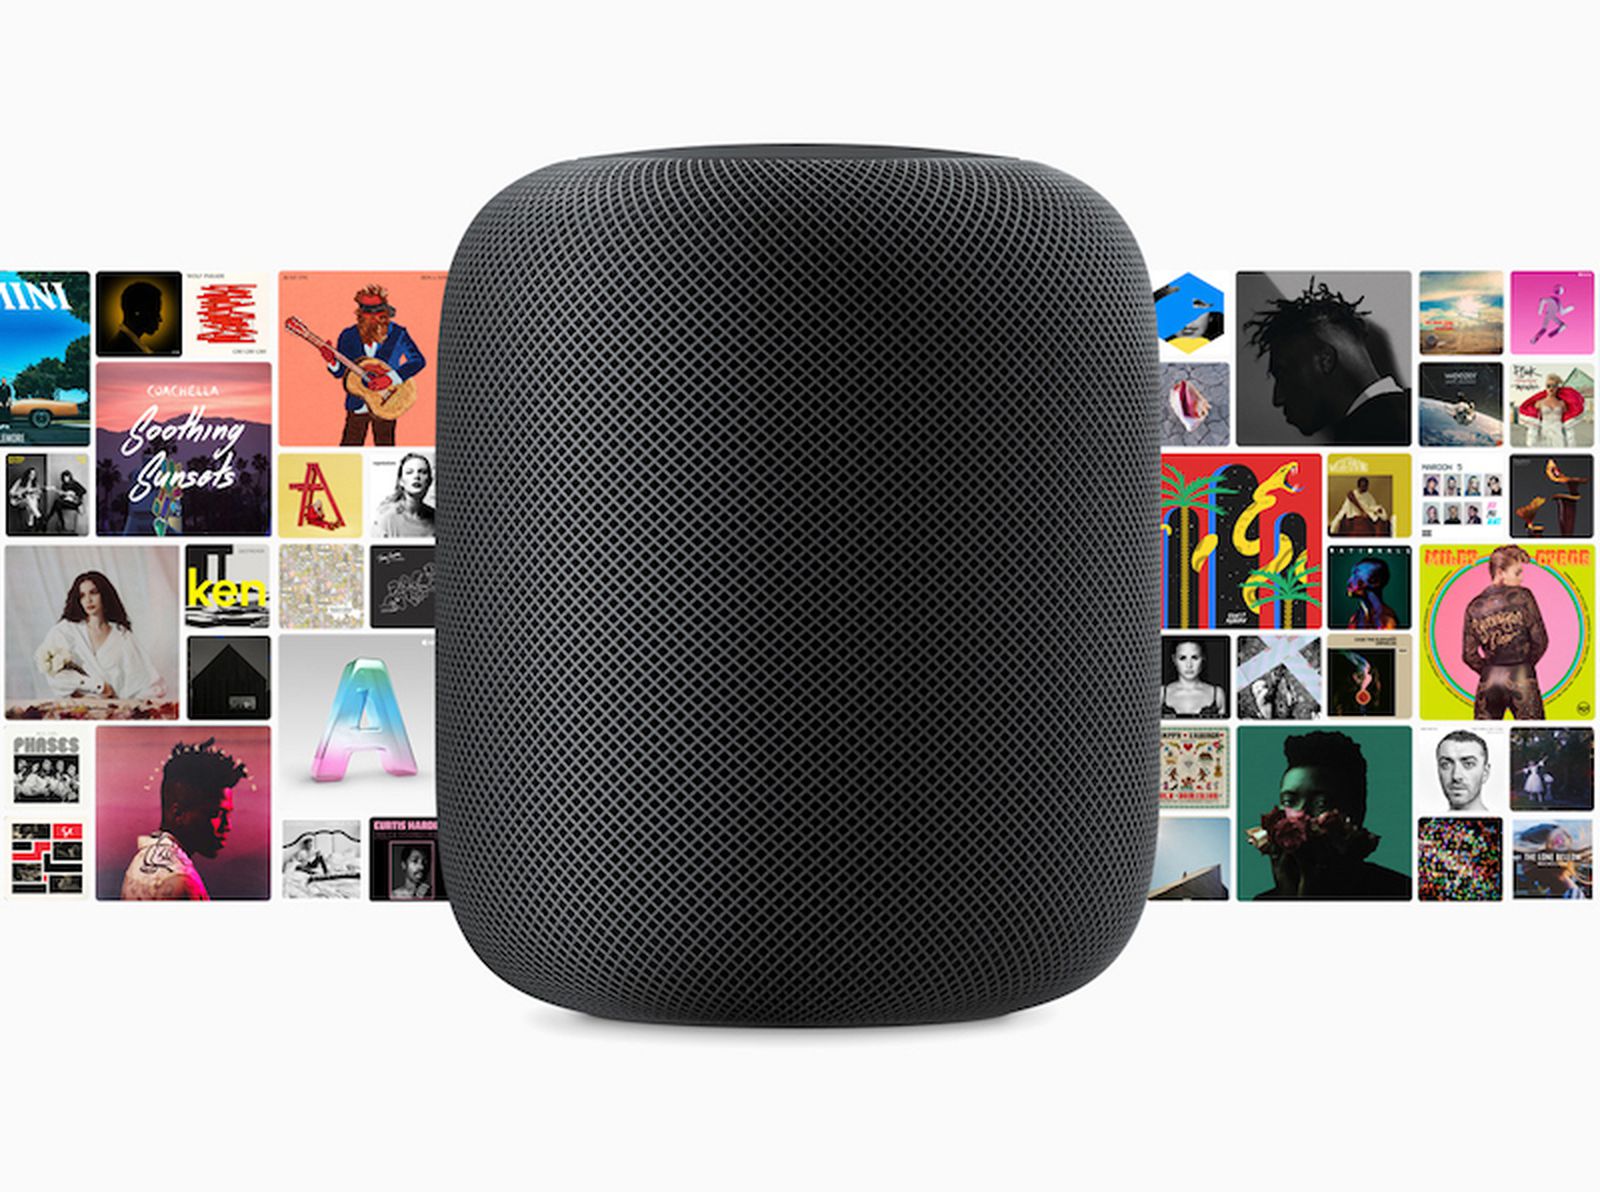 Which music services are supported on the HomePod?